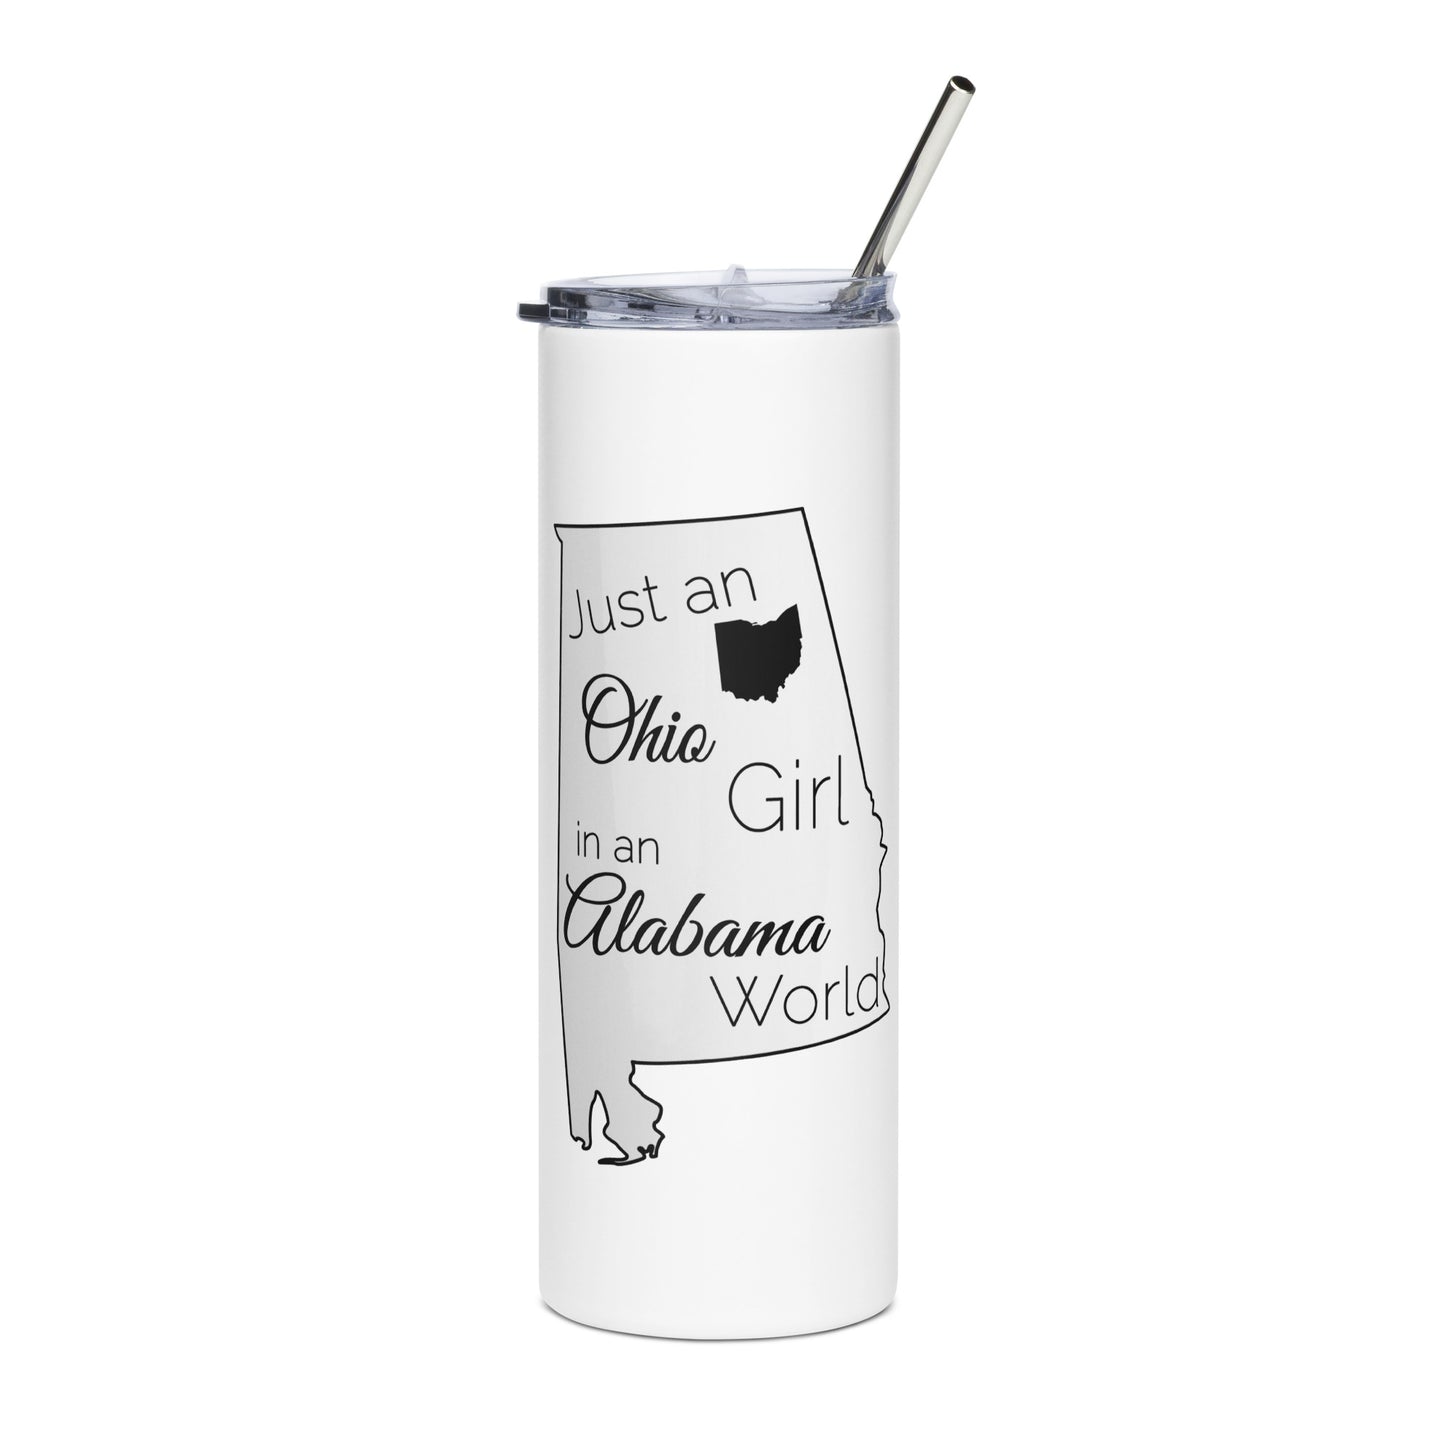 Just an Ohio Girl in an Alabama World Stainless steel tumbler